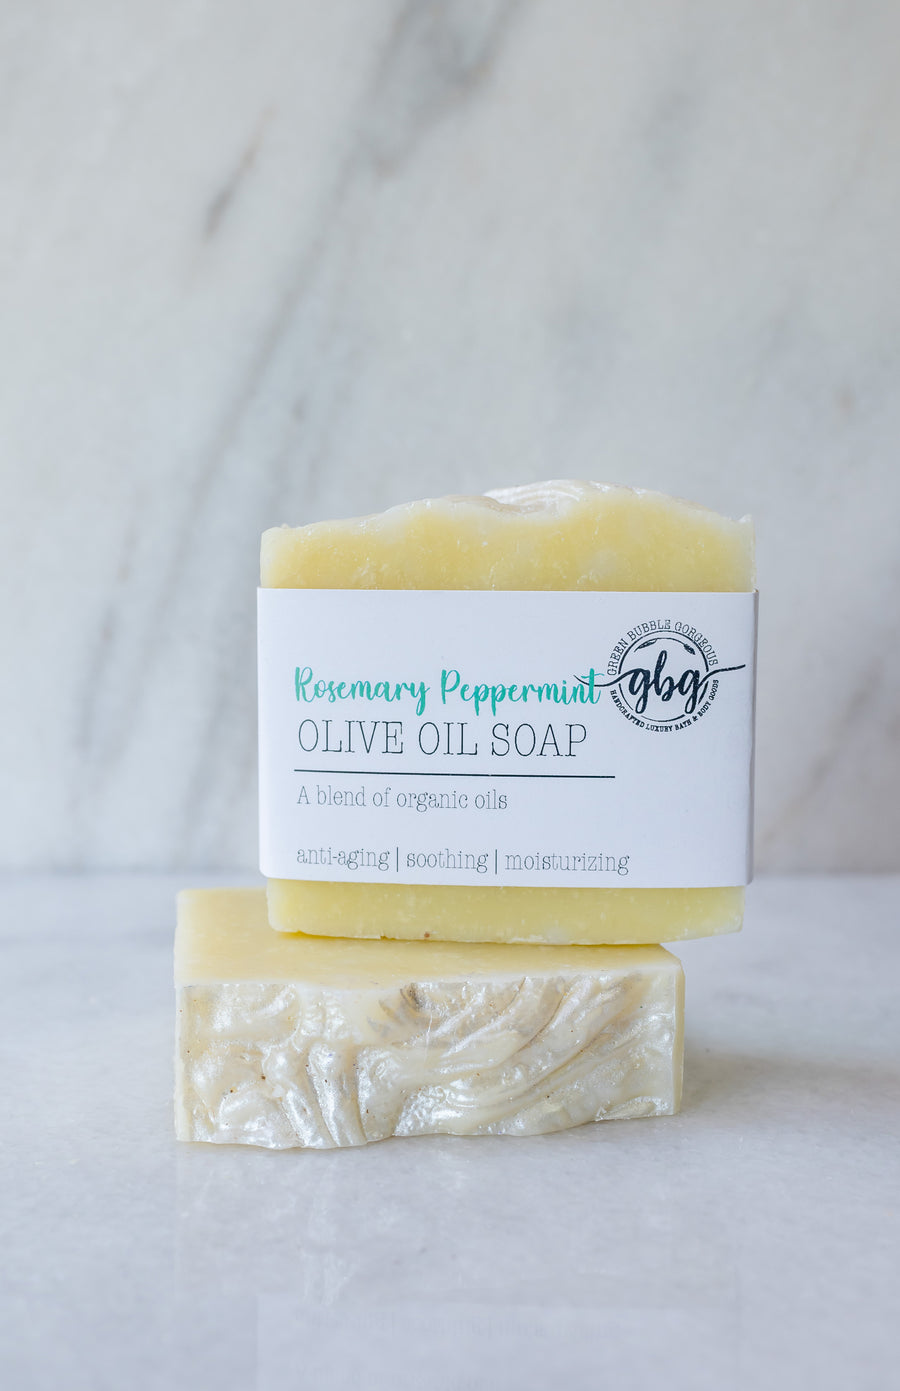 Rosemary Peppermint Olive Oil Soap